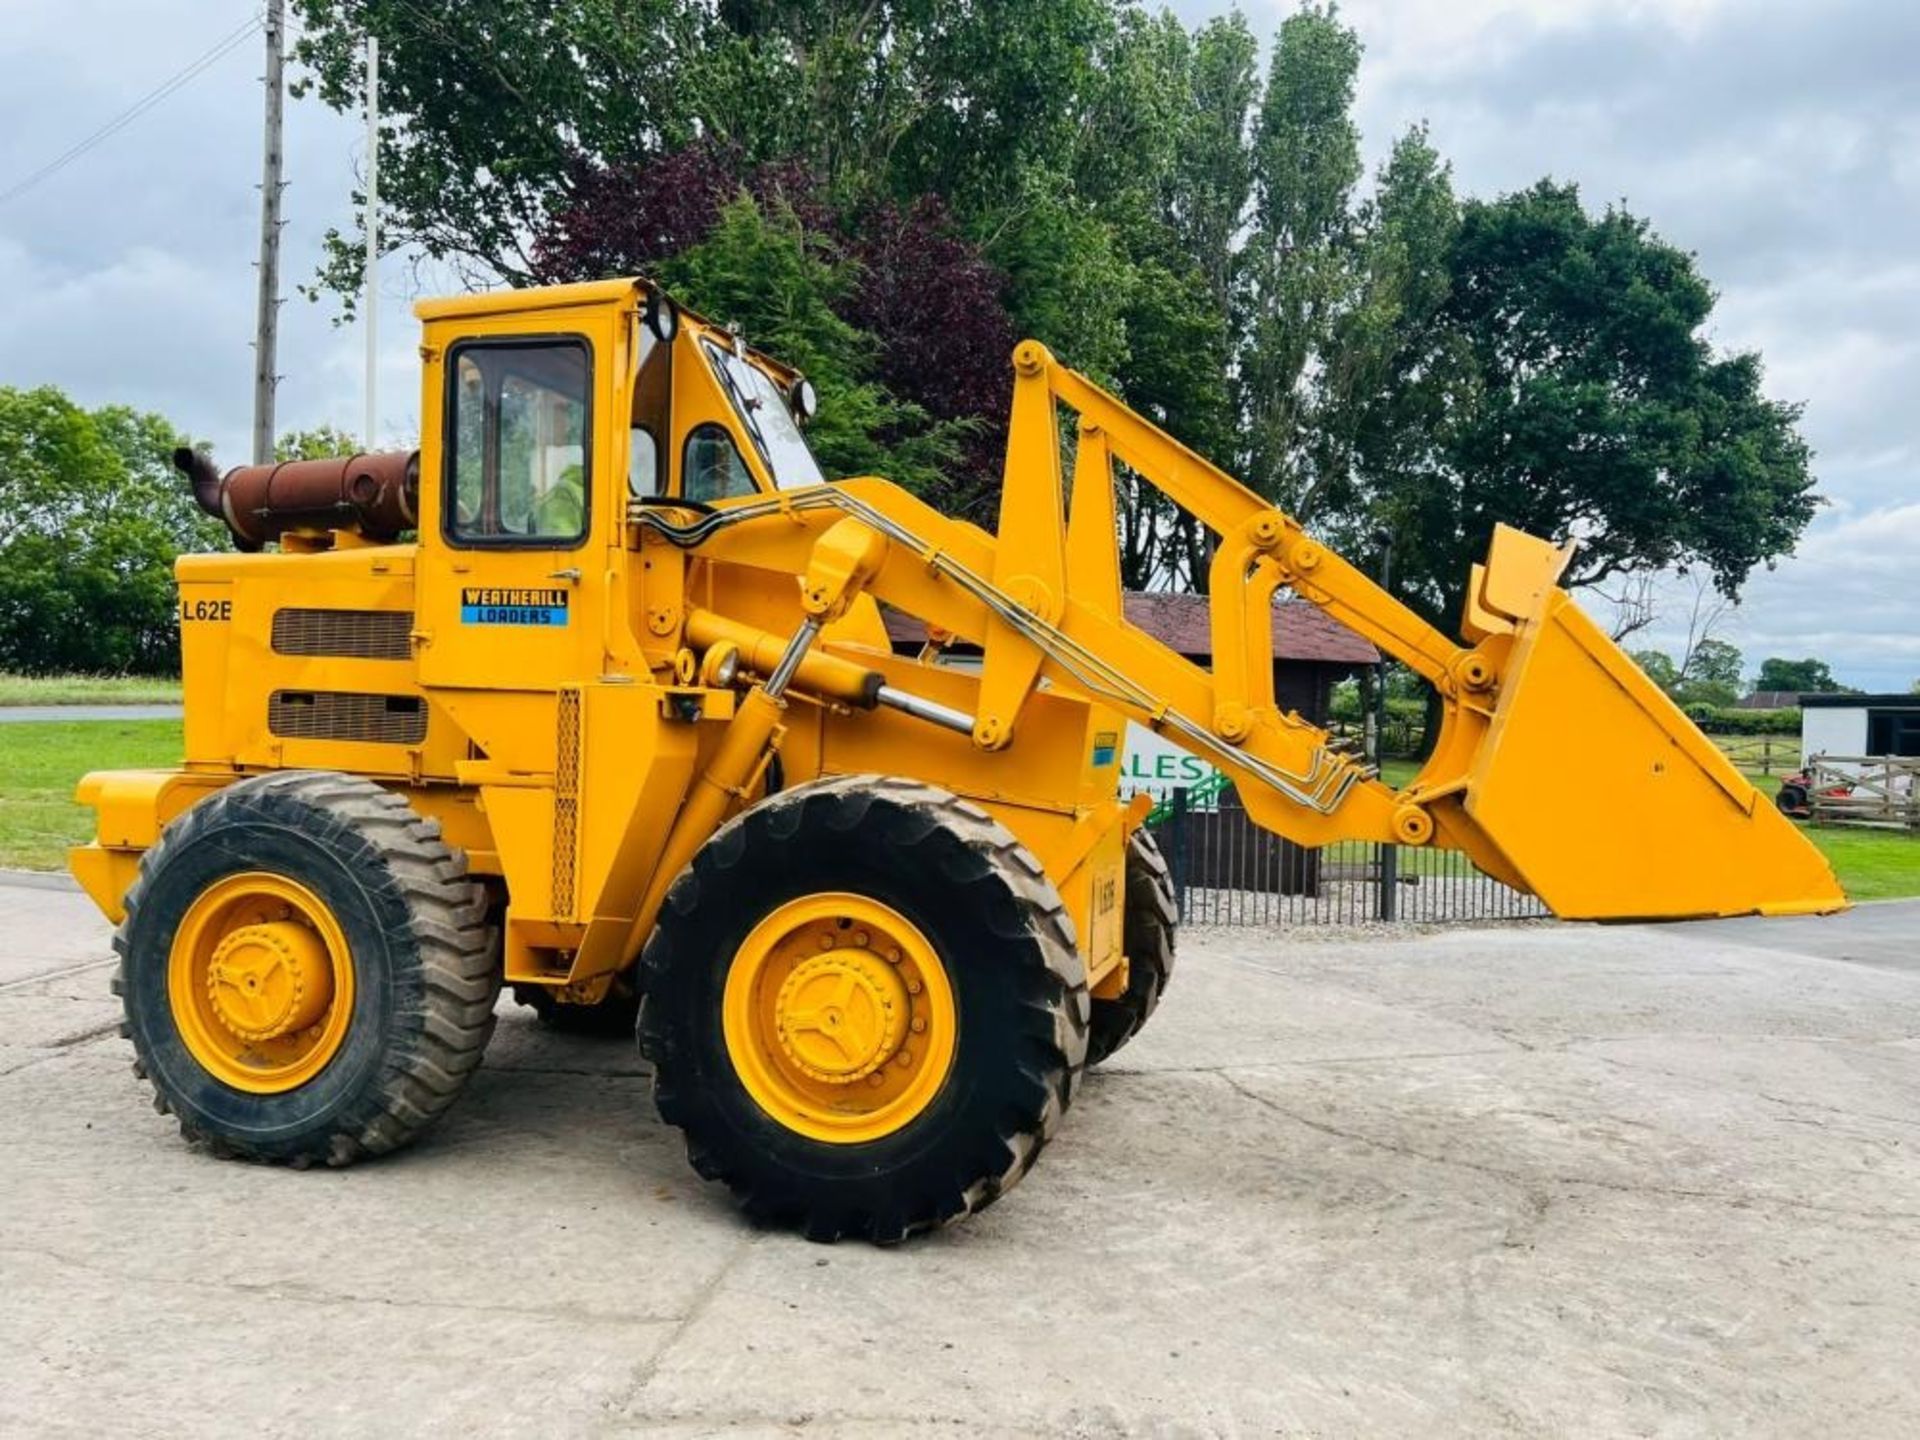 WEATHERILL L62B-11-690 4WD LOADING SHOVEL C/W BUCKET *CHOICE OF TWO* - Image 4 of 13